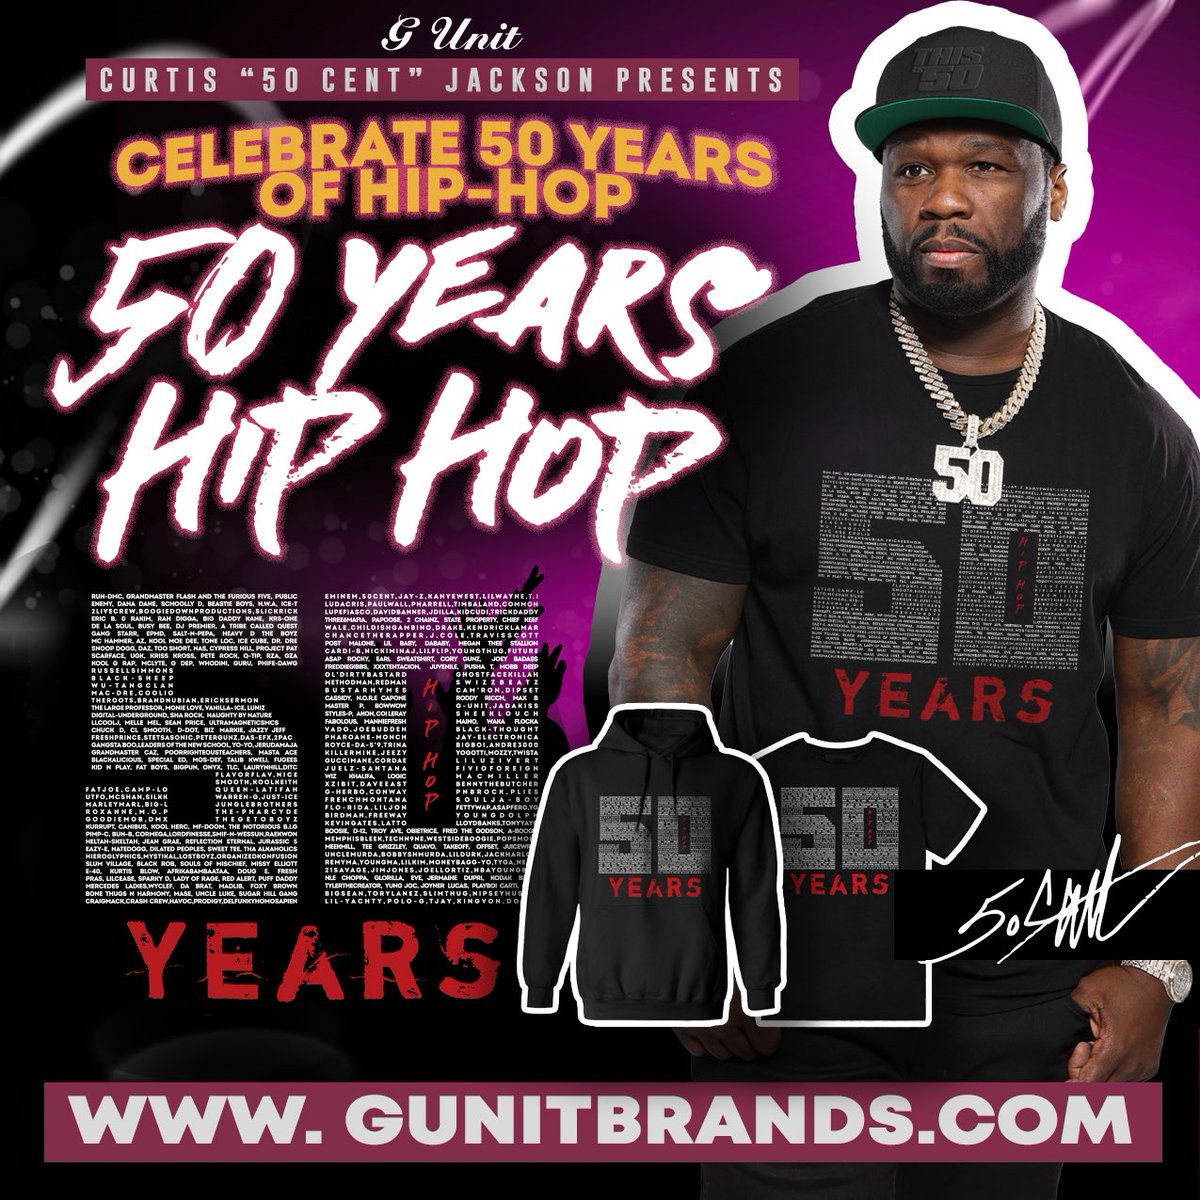 It’s the 50th Anniversary of Hip Hop! Celebrate 50 Years of Hip Hop Today! Shop Now  • gunitbrands.com/products/50-ye…
 
Don’t forget to tag me in your photos #HipHop50